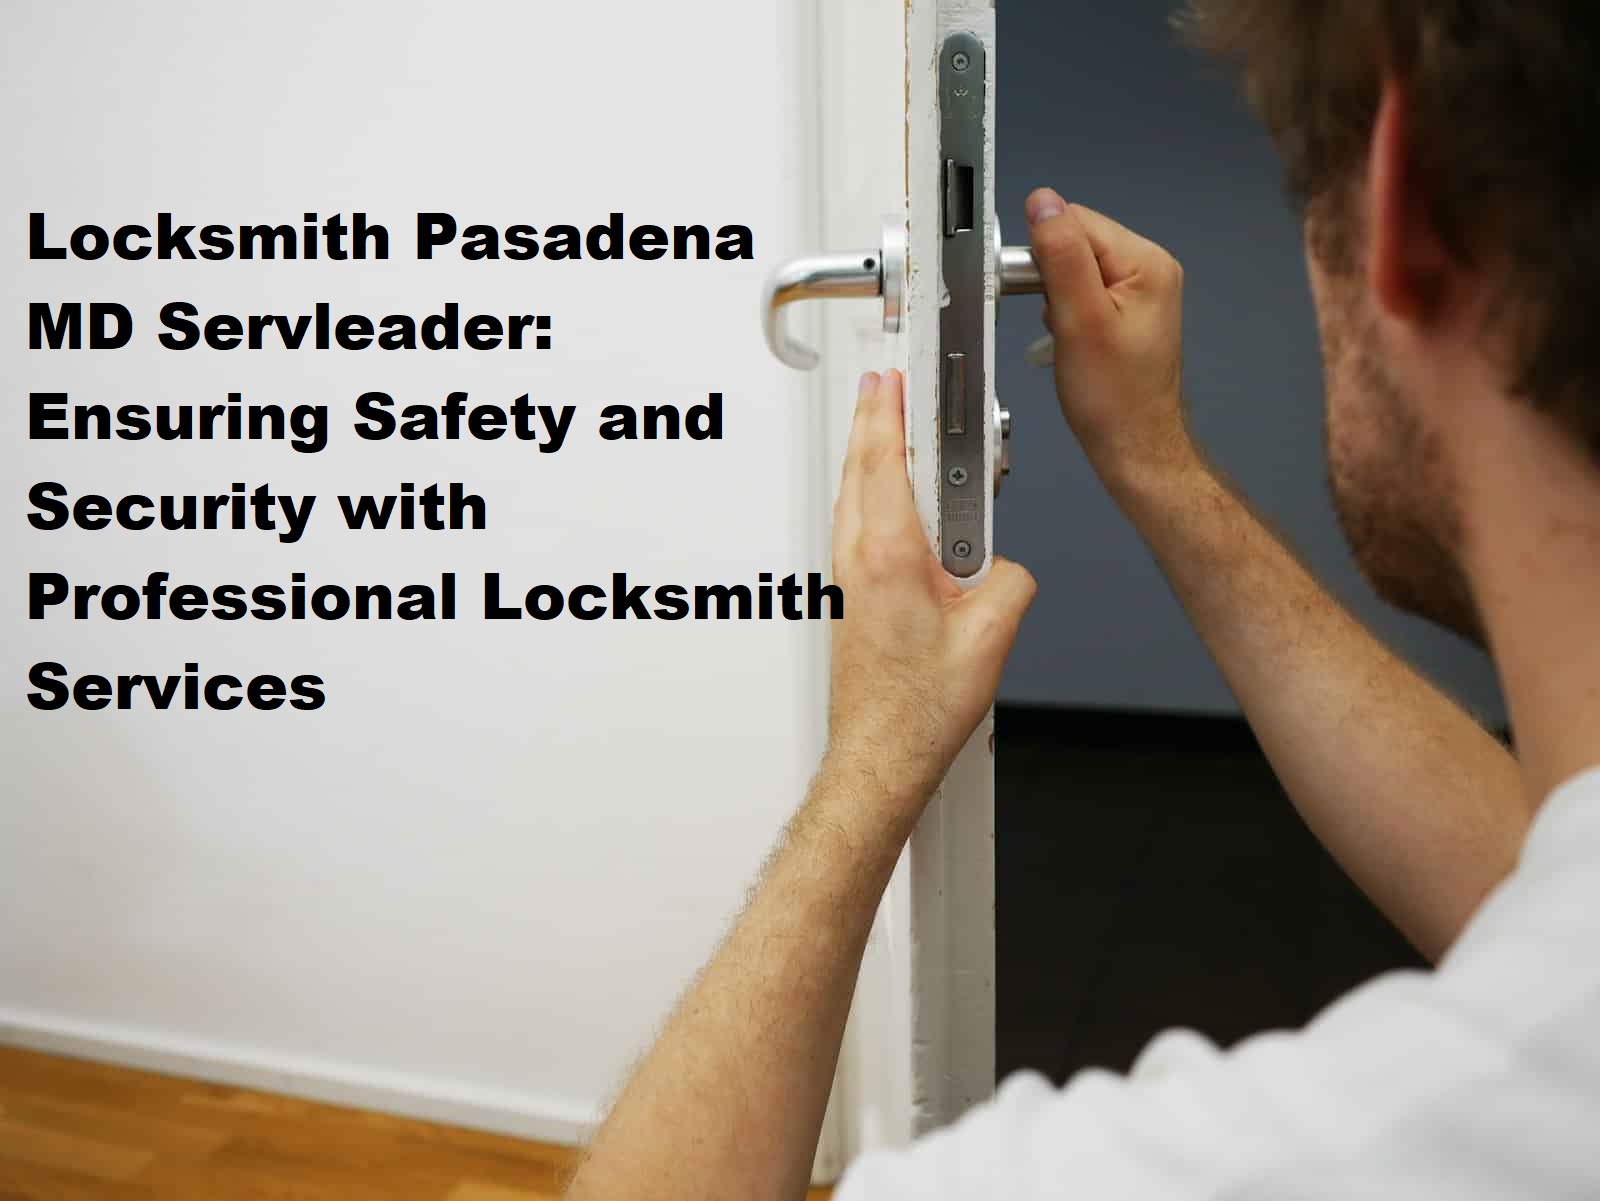 Locksmith Pasadena MD Servleader: Ensuring Safety and Security with Professional Locksmith Services